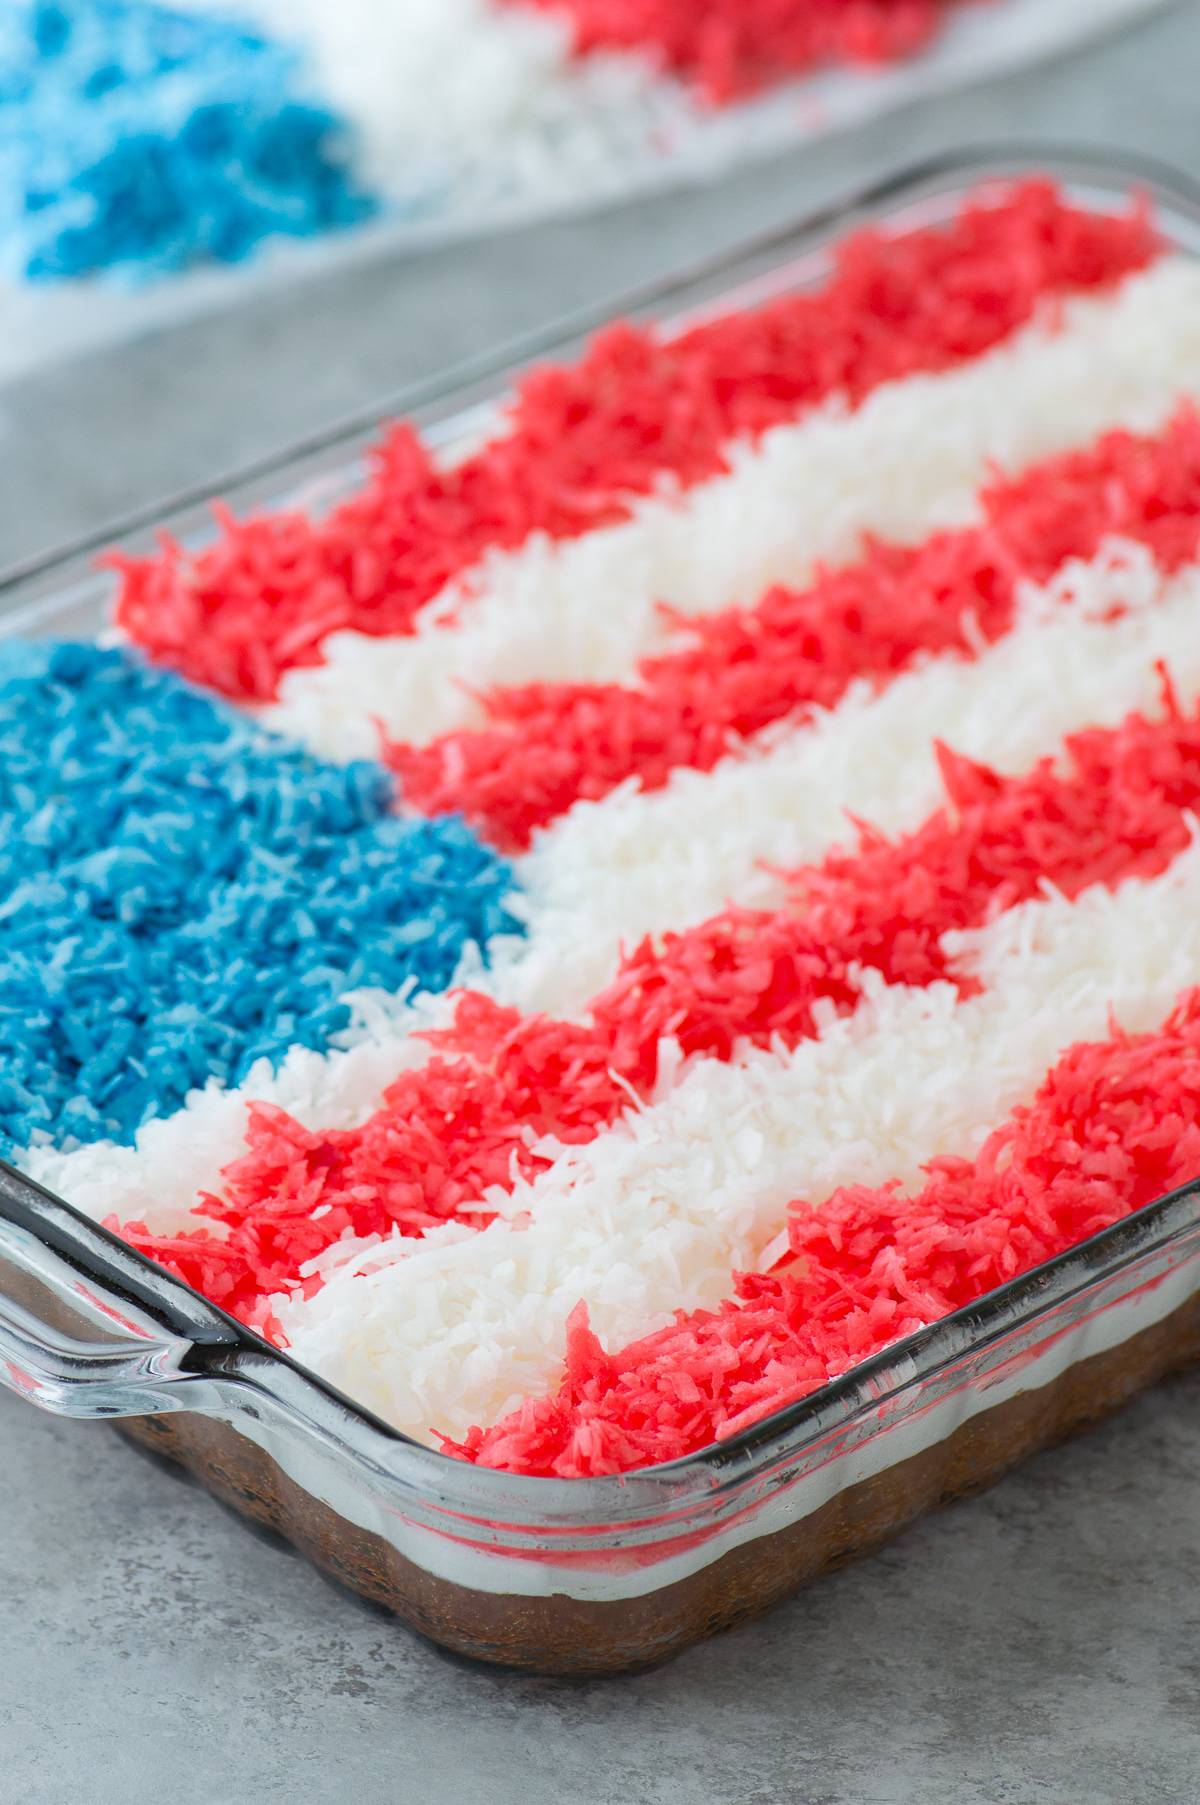 4th of july cake topped with red, white and blue shredded coconut in a flag pattern